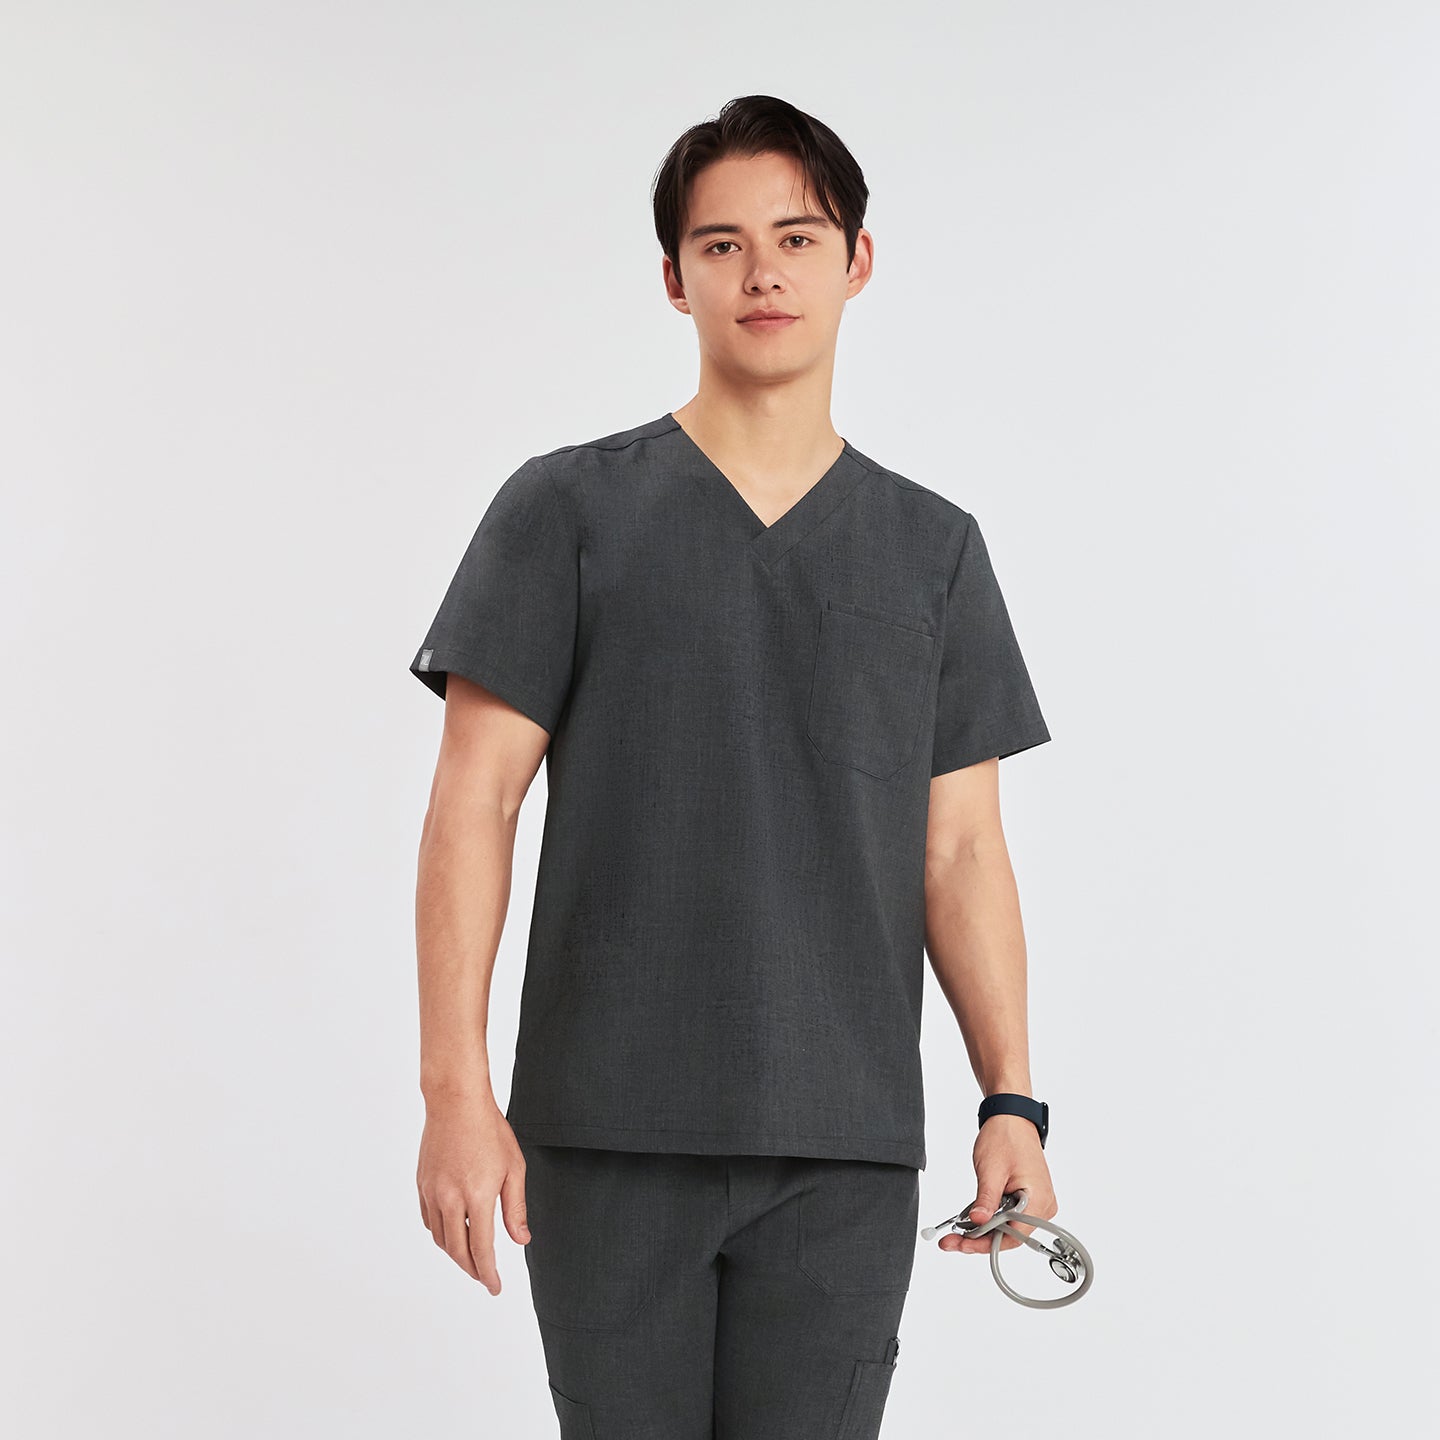 A man wearing a 3-pocket scrub top, standing and holding a stethoscope in one hand,Charcoal Gray